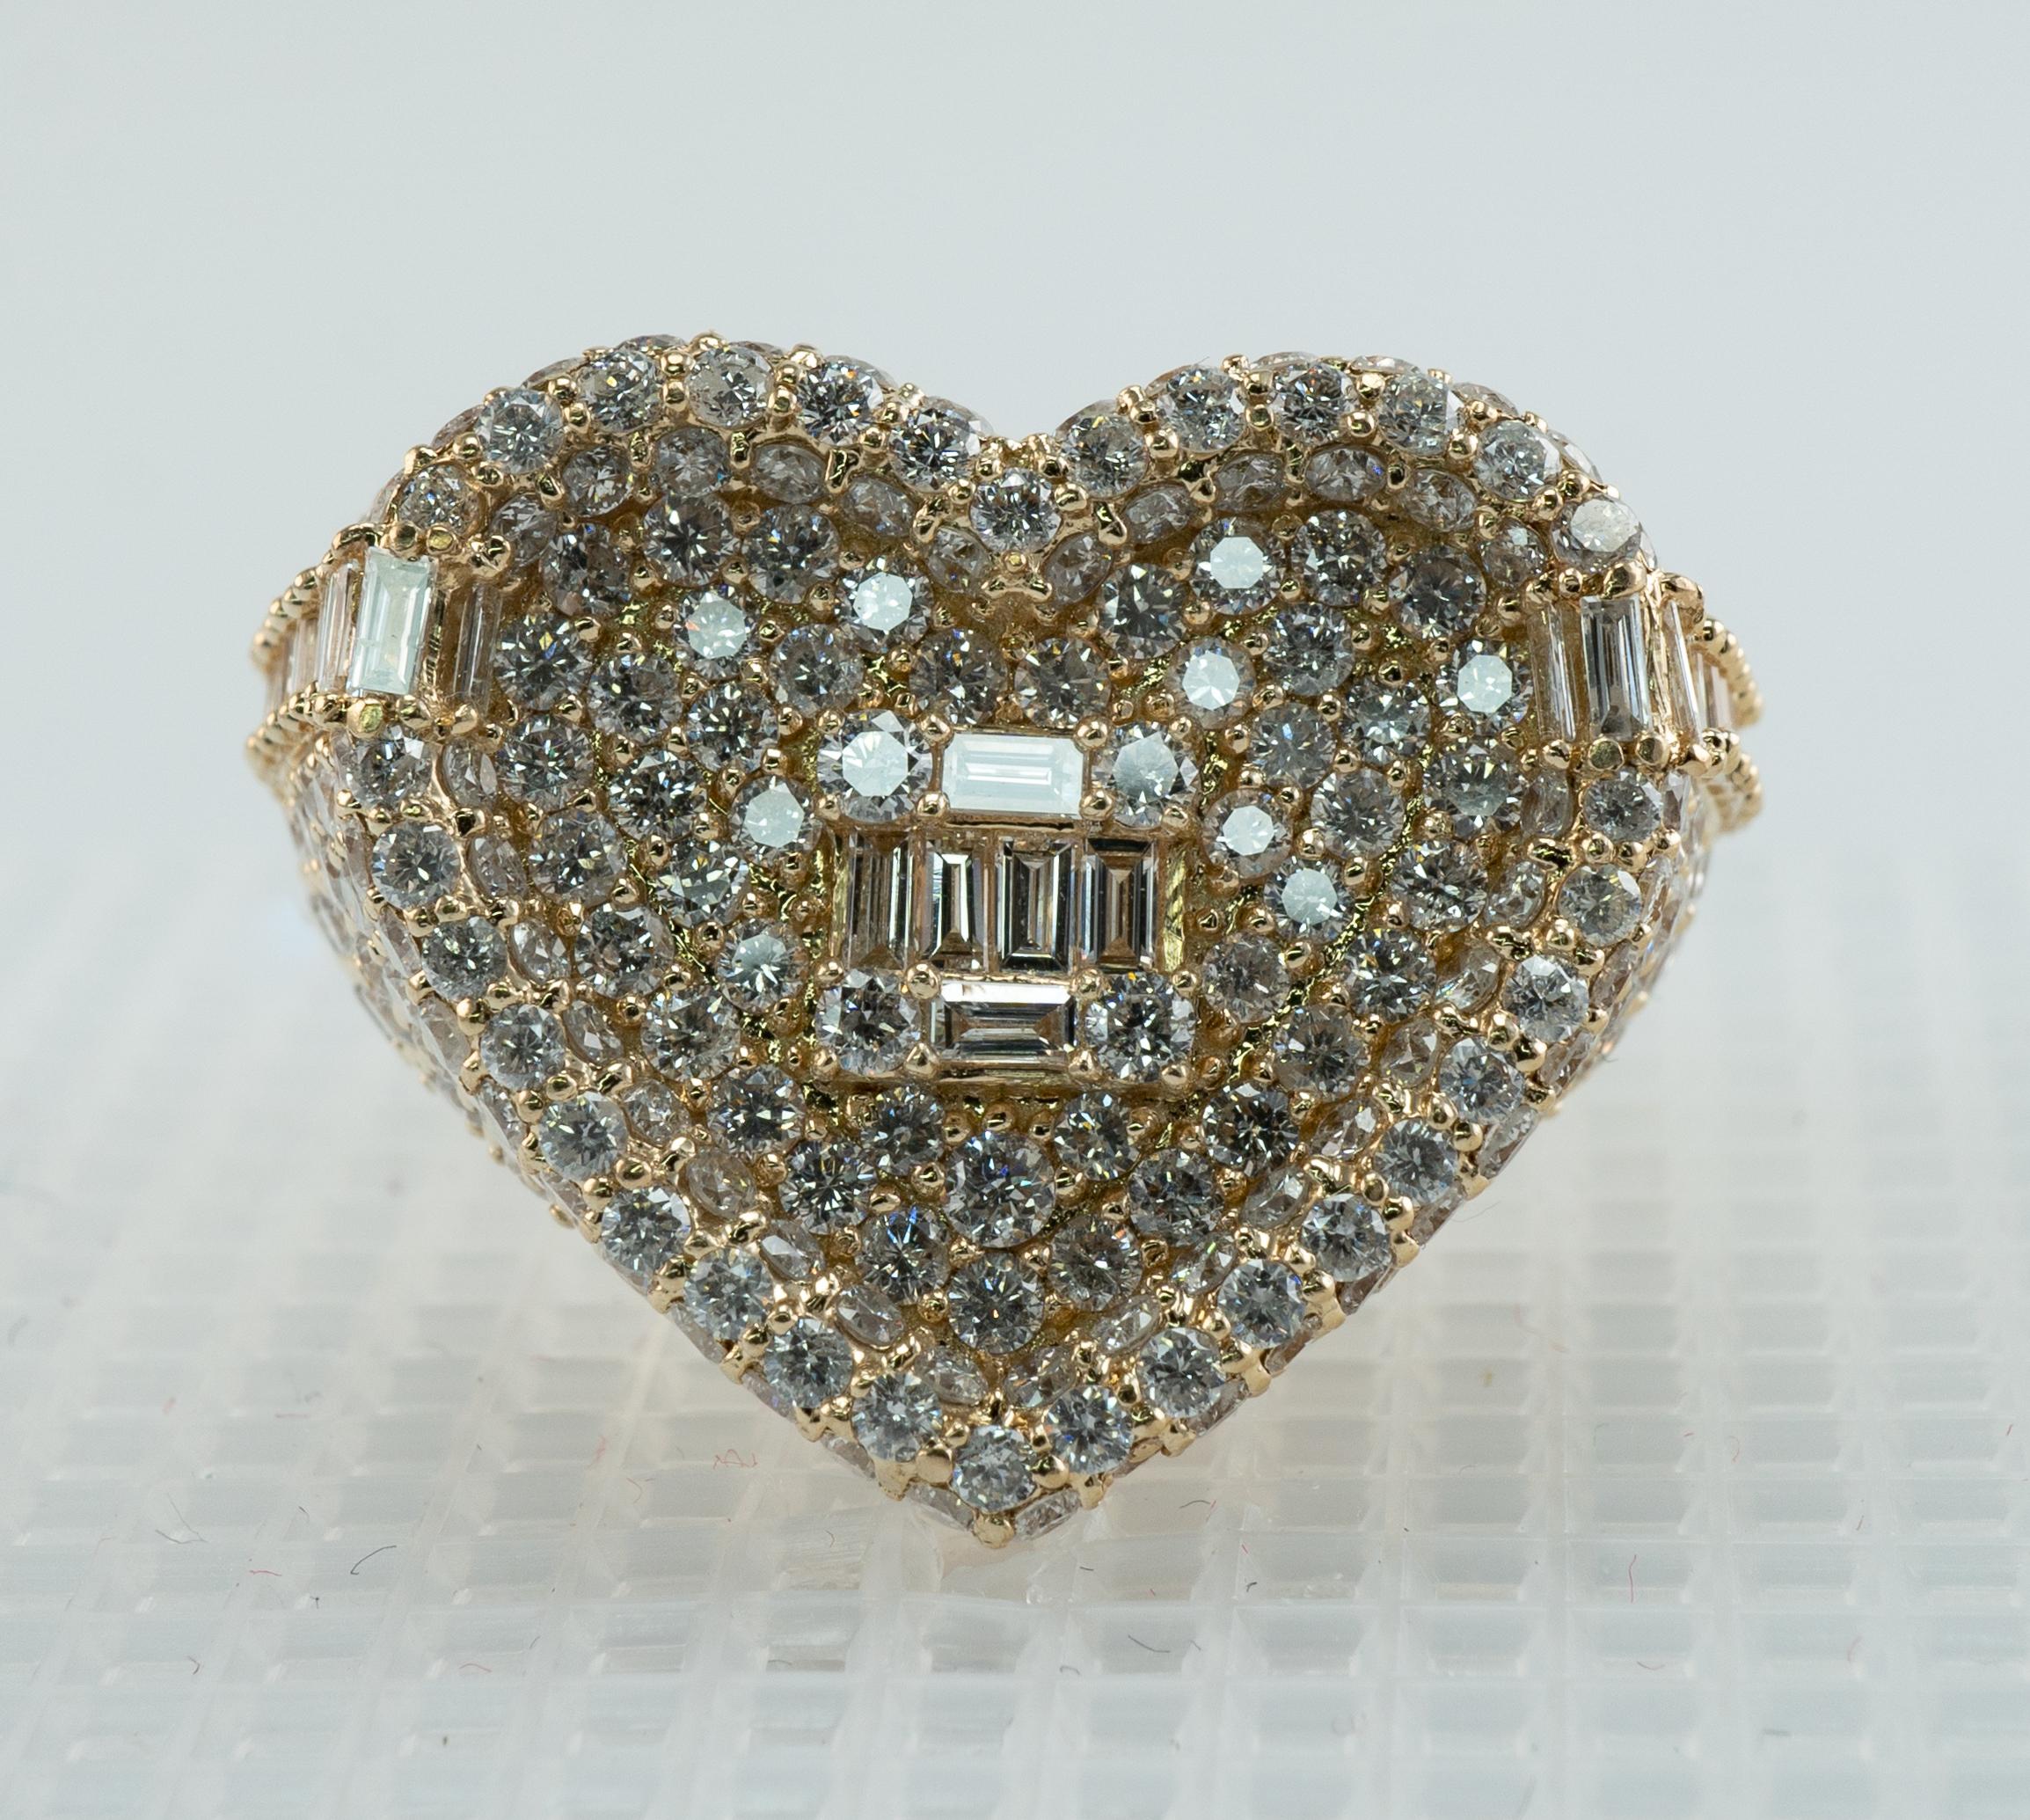 This estate ring is made in the shape of Heart.
The ring is studded with about 295 round diamonds and 26 diamond baguettes.
The diamonds are SI1-SI2 clarity and H color.
The total diamond weight for the ring is about 3.74 carats.
The face of the